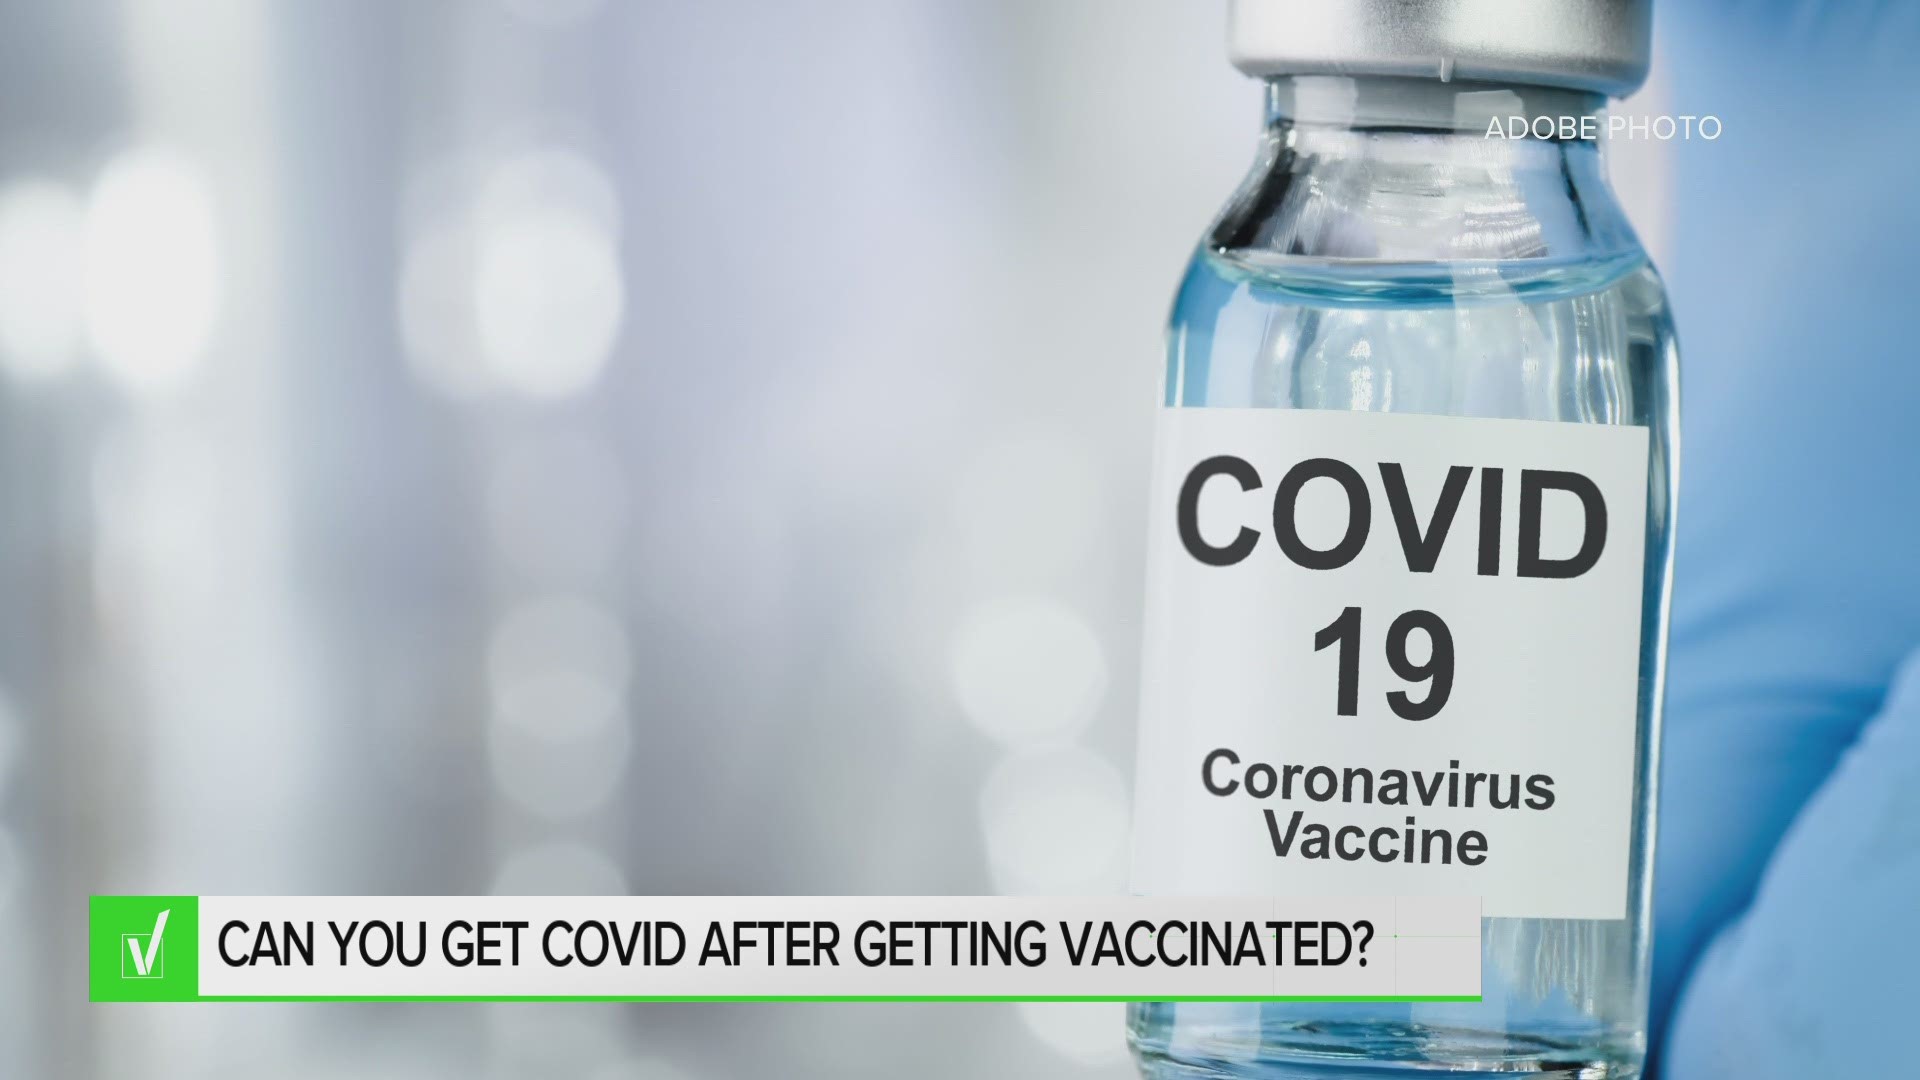 The Verify team spoke with medical experts about whether one can become infected with COVID-19 if they are fully vaccinated.